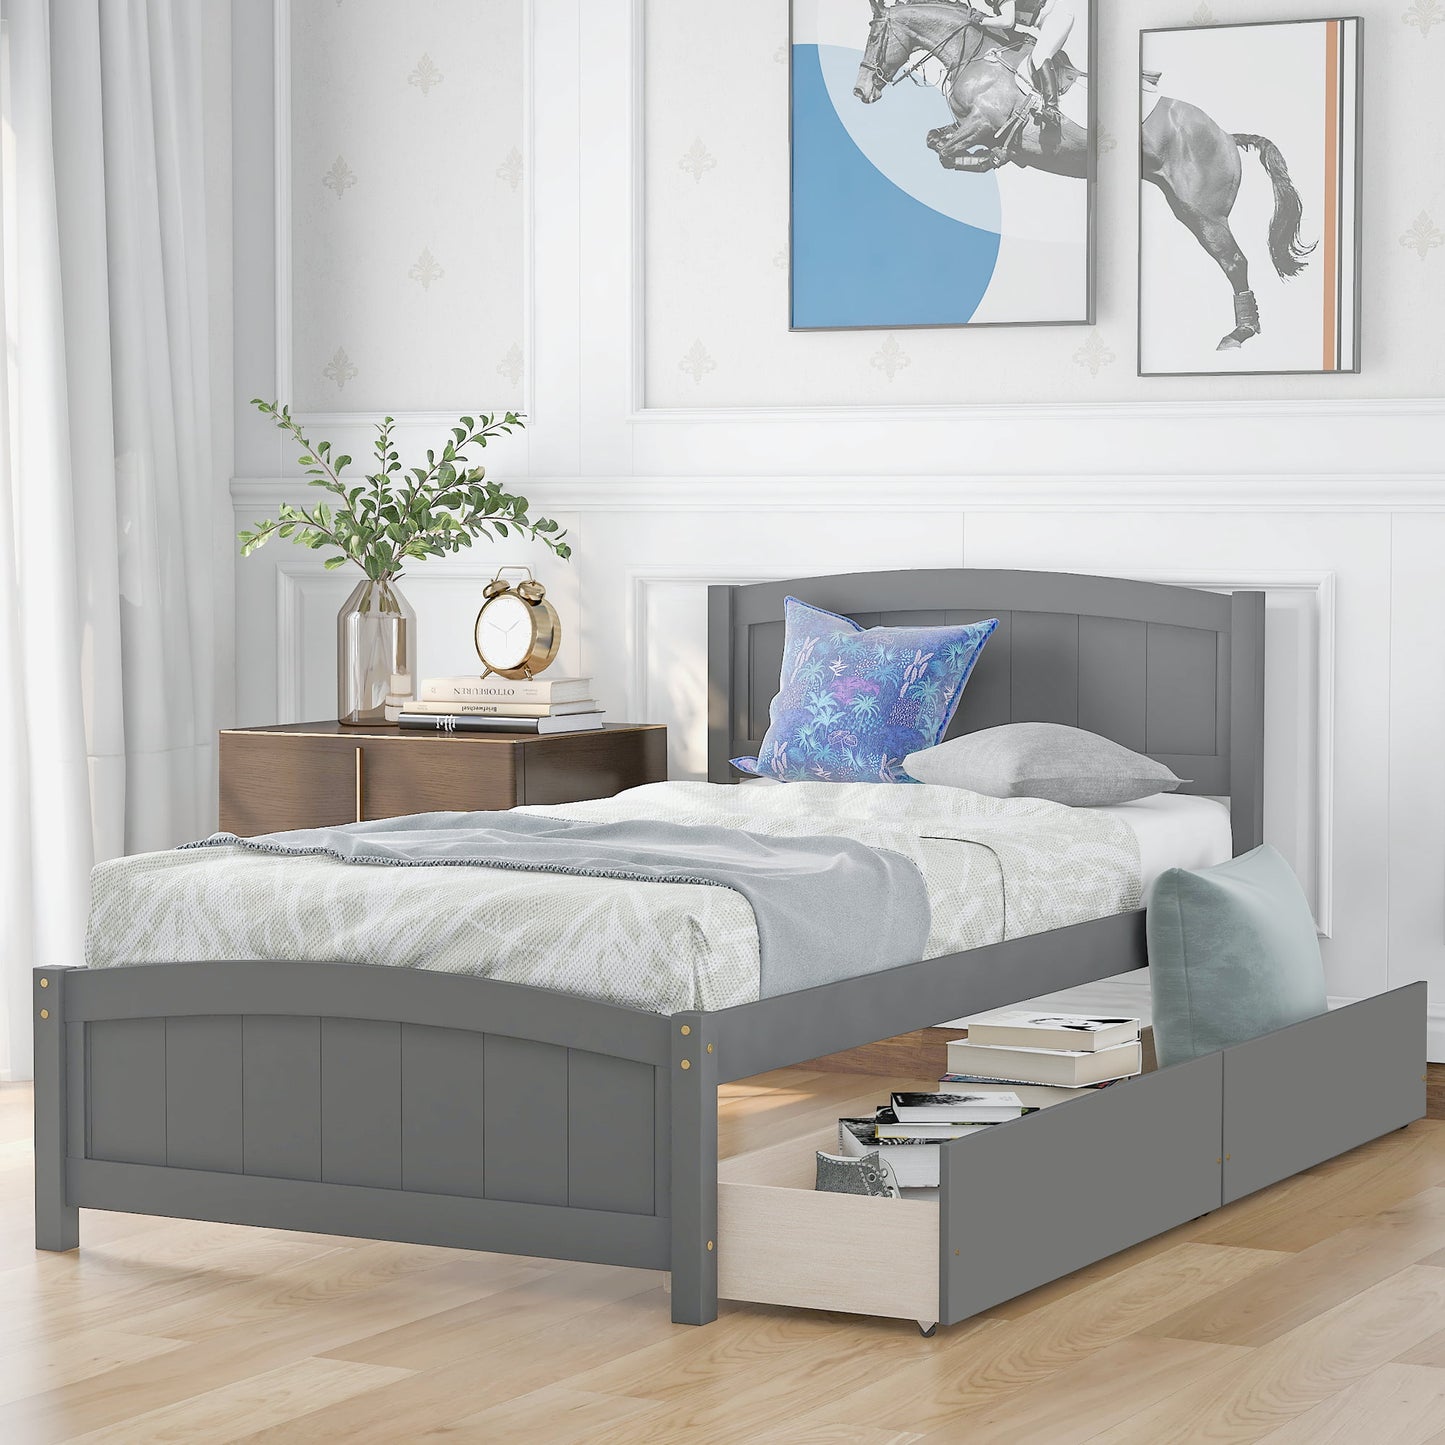 SYNGAR Twin Bed Frame with Storage Drawers, Pine Wood Platform Bed for Boys Girls Teens Adults, Gray, LJ712